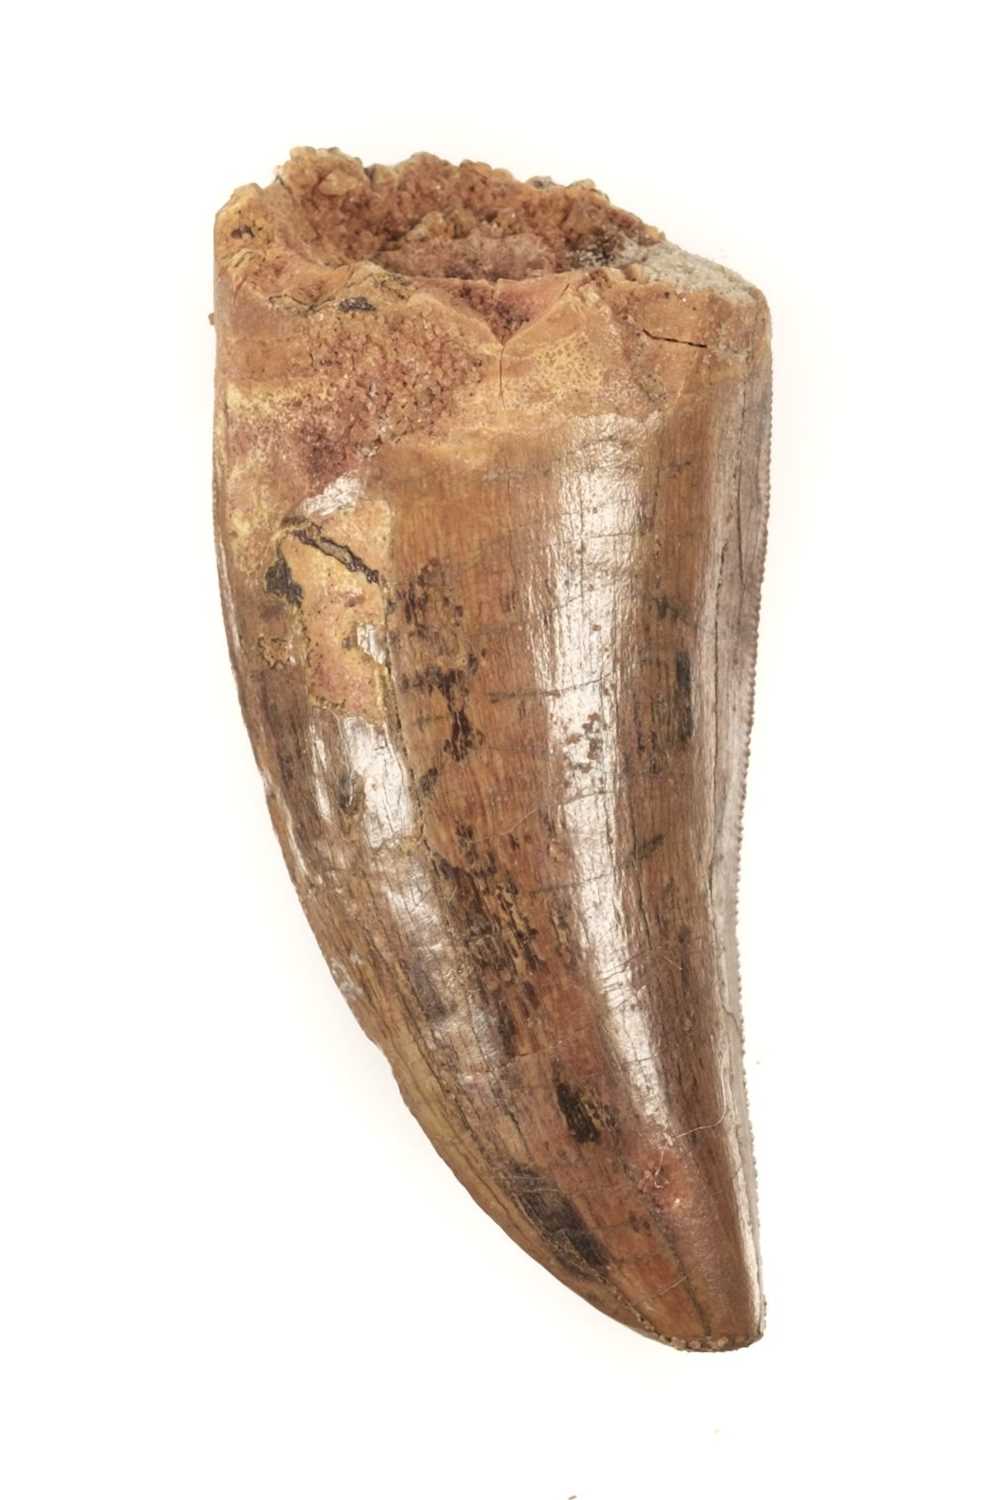 Lot 181 - Carcharodontosaurus Tooth. A large dinosaur tooth from the Cretaceous of Morocco